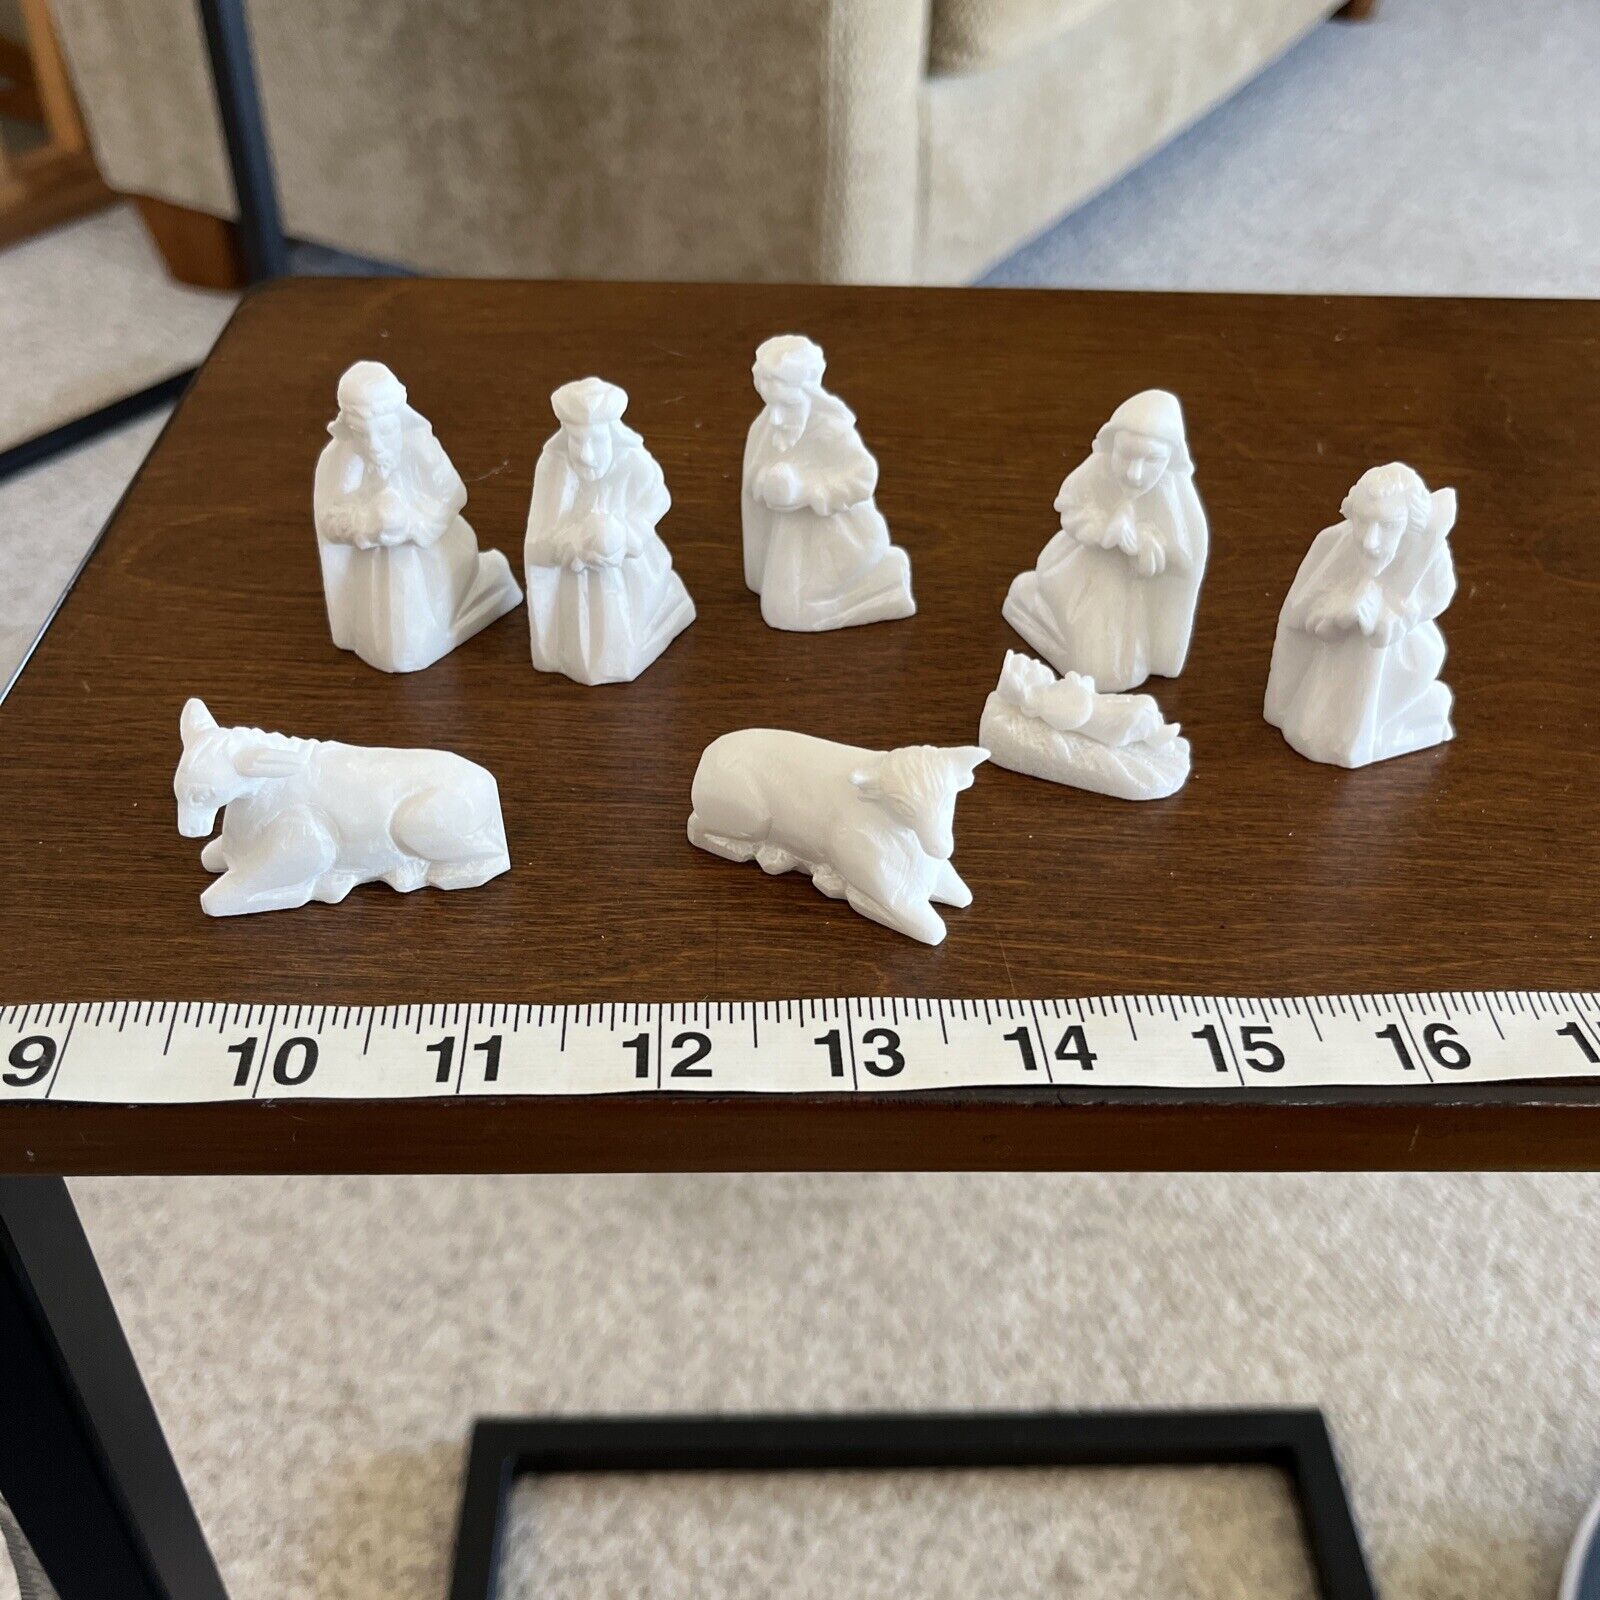 White Stone Small Nativity set 9 Pieces From Vietnam 2002